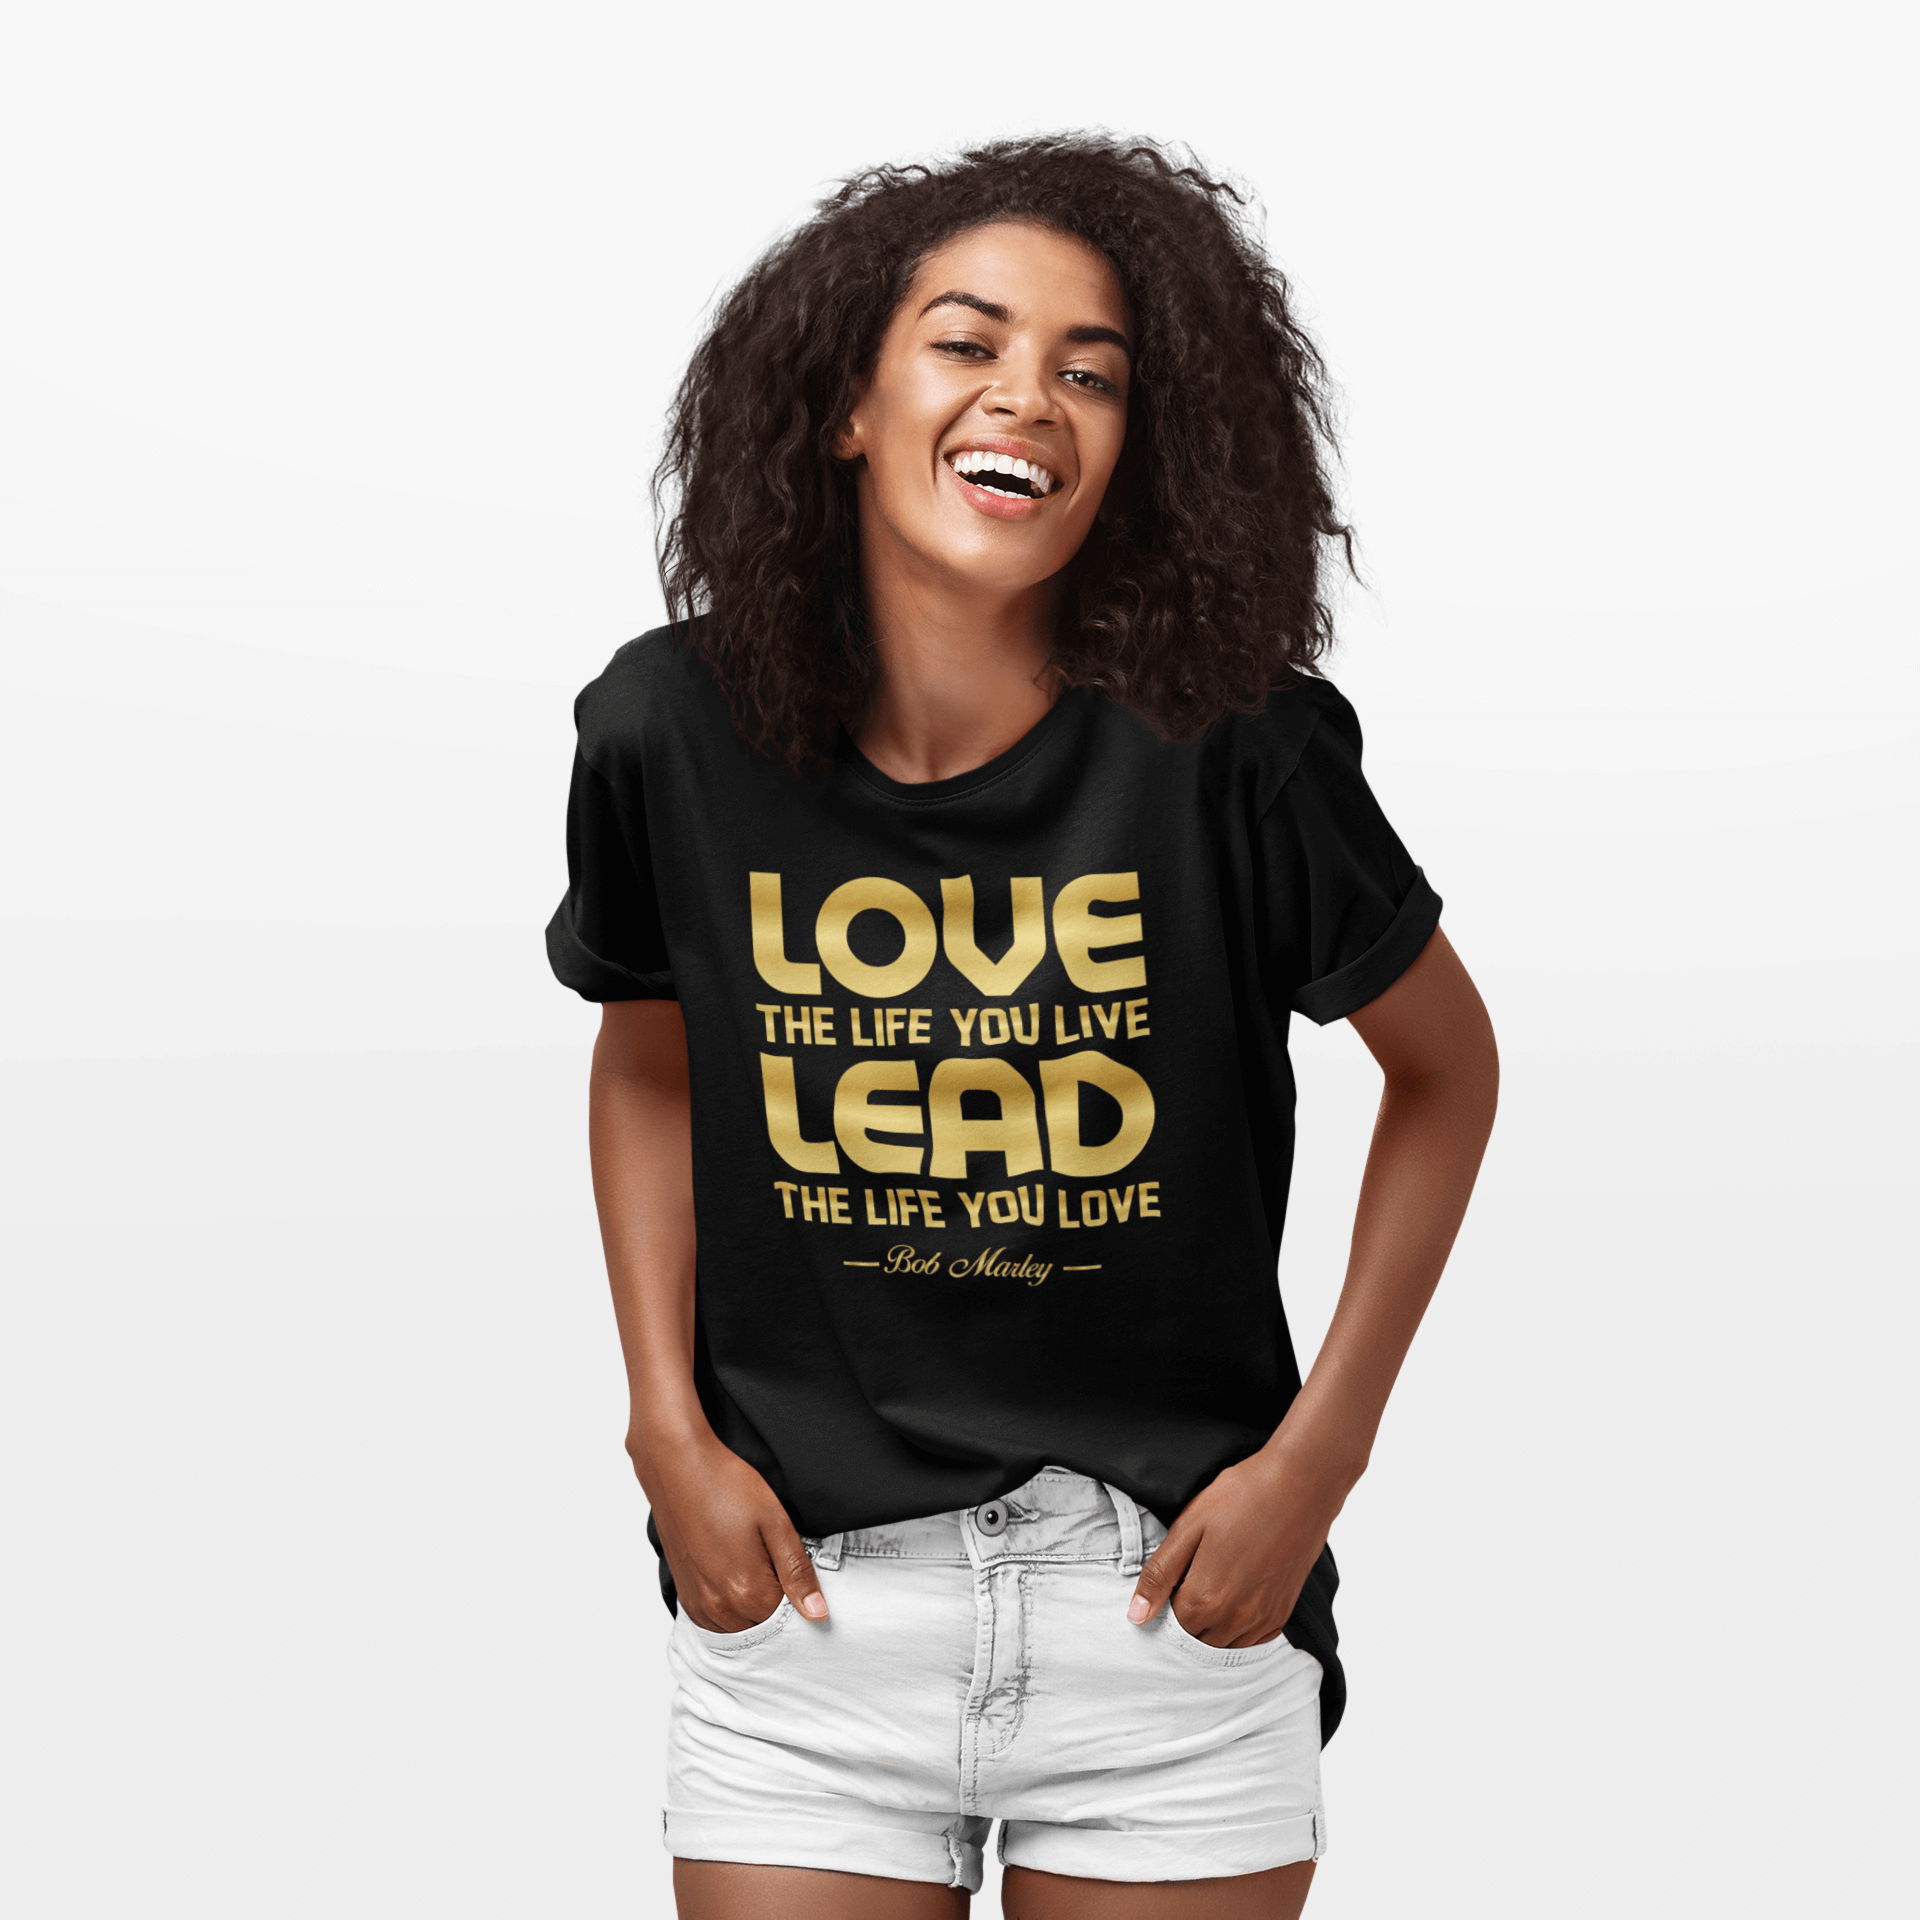 Love The Life Live - Marley Quote - Women's Vintage Tee – Abanak